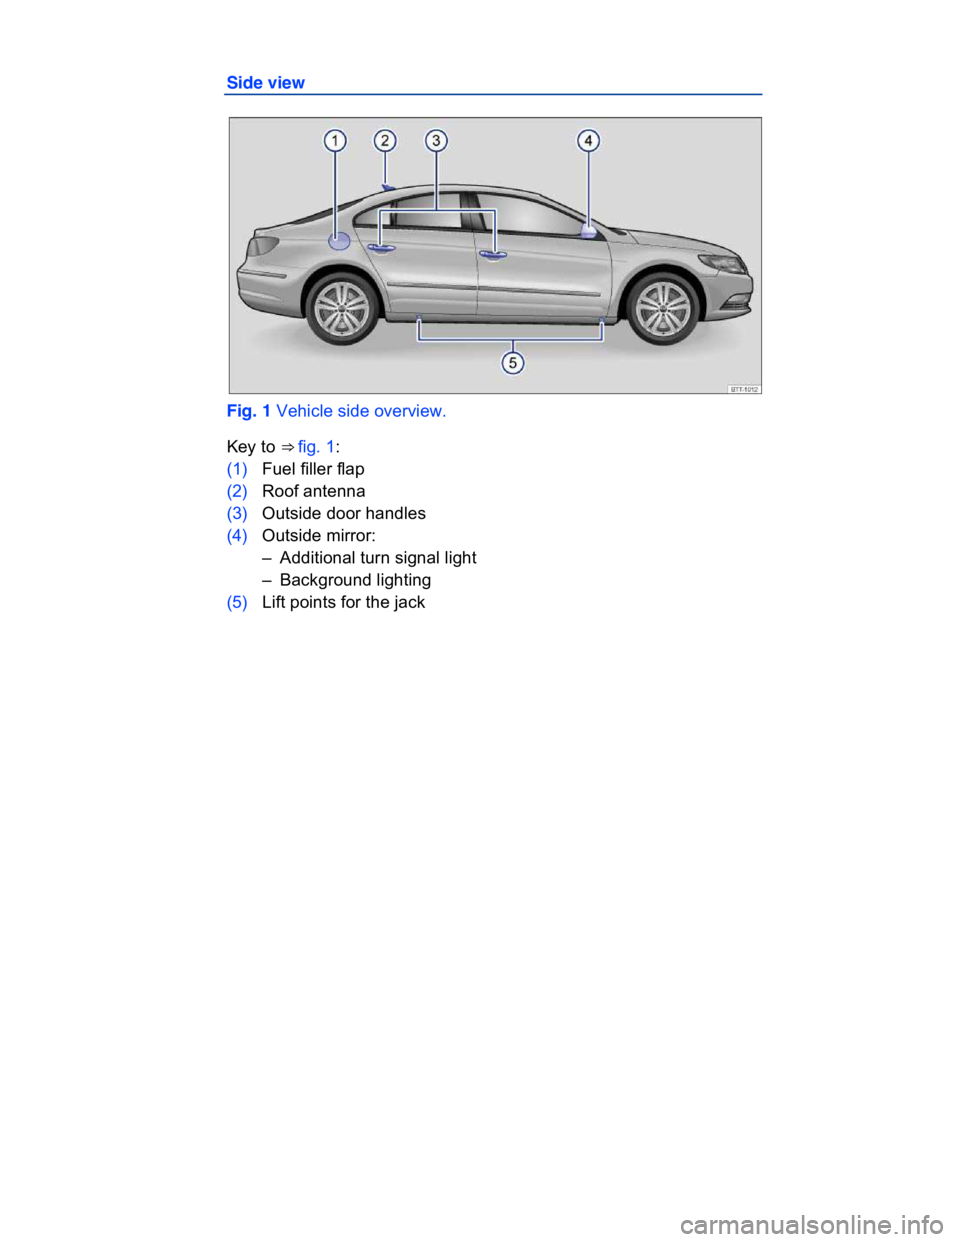 VOLKSWAGEN CC 2011  Owners Manual  
Side view 
 
Fig. 1 Vehicle side overview. 
Key to ⇒ fig. 1: 
(1) Fuel filler flap  
(2) Roof antenna  
(3) Outside door handles  
(4) Outside mirror:  
–  Additional turn signal light  
–  